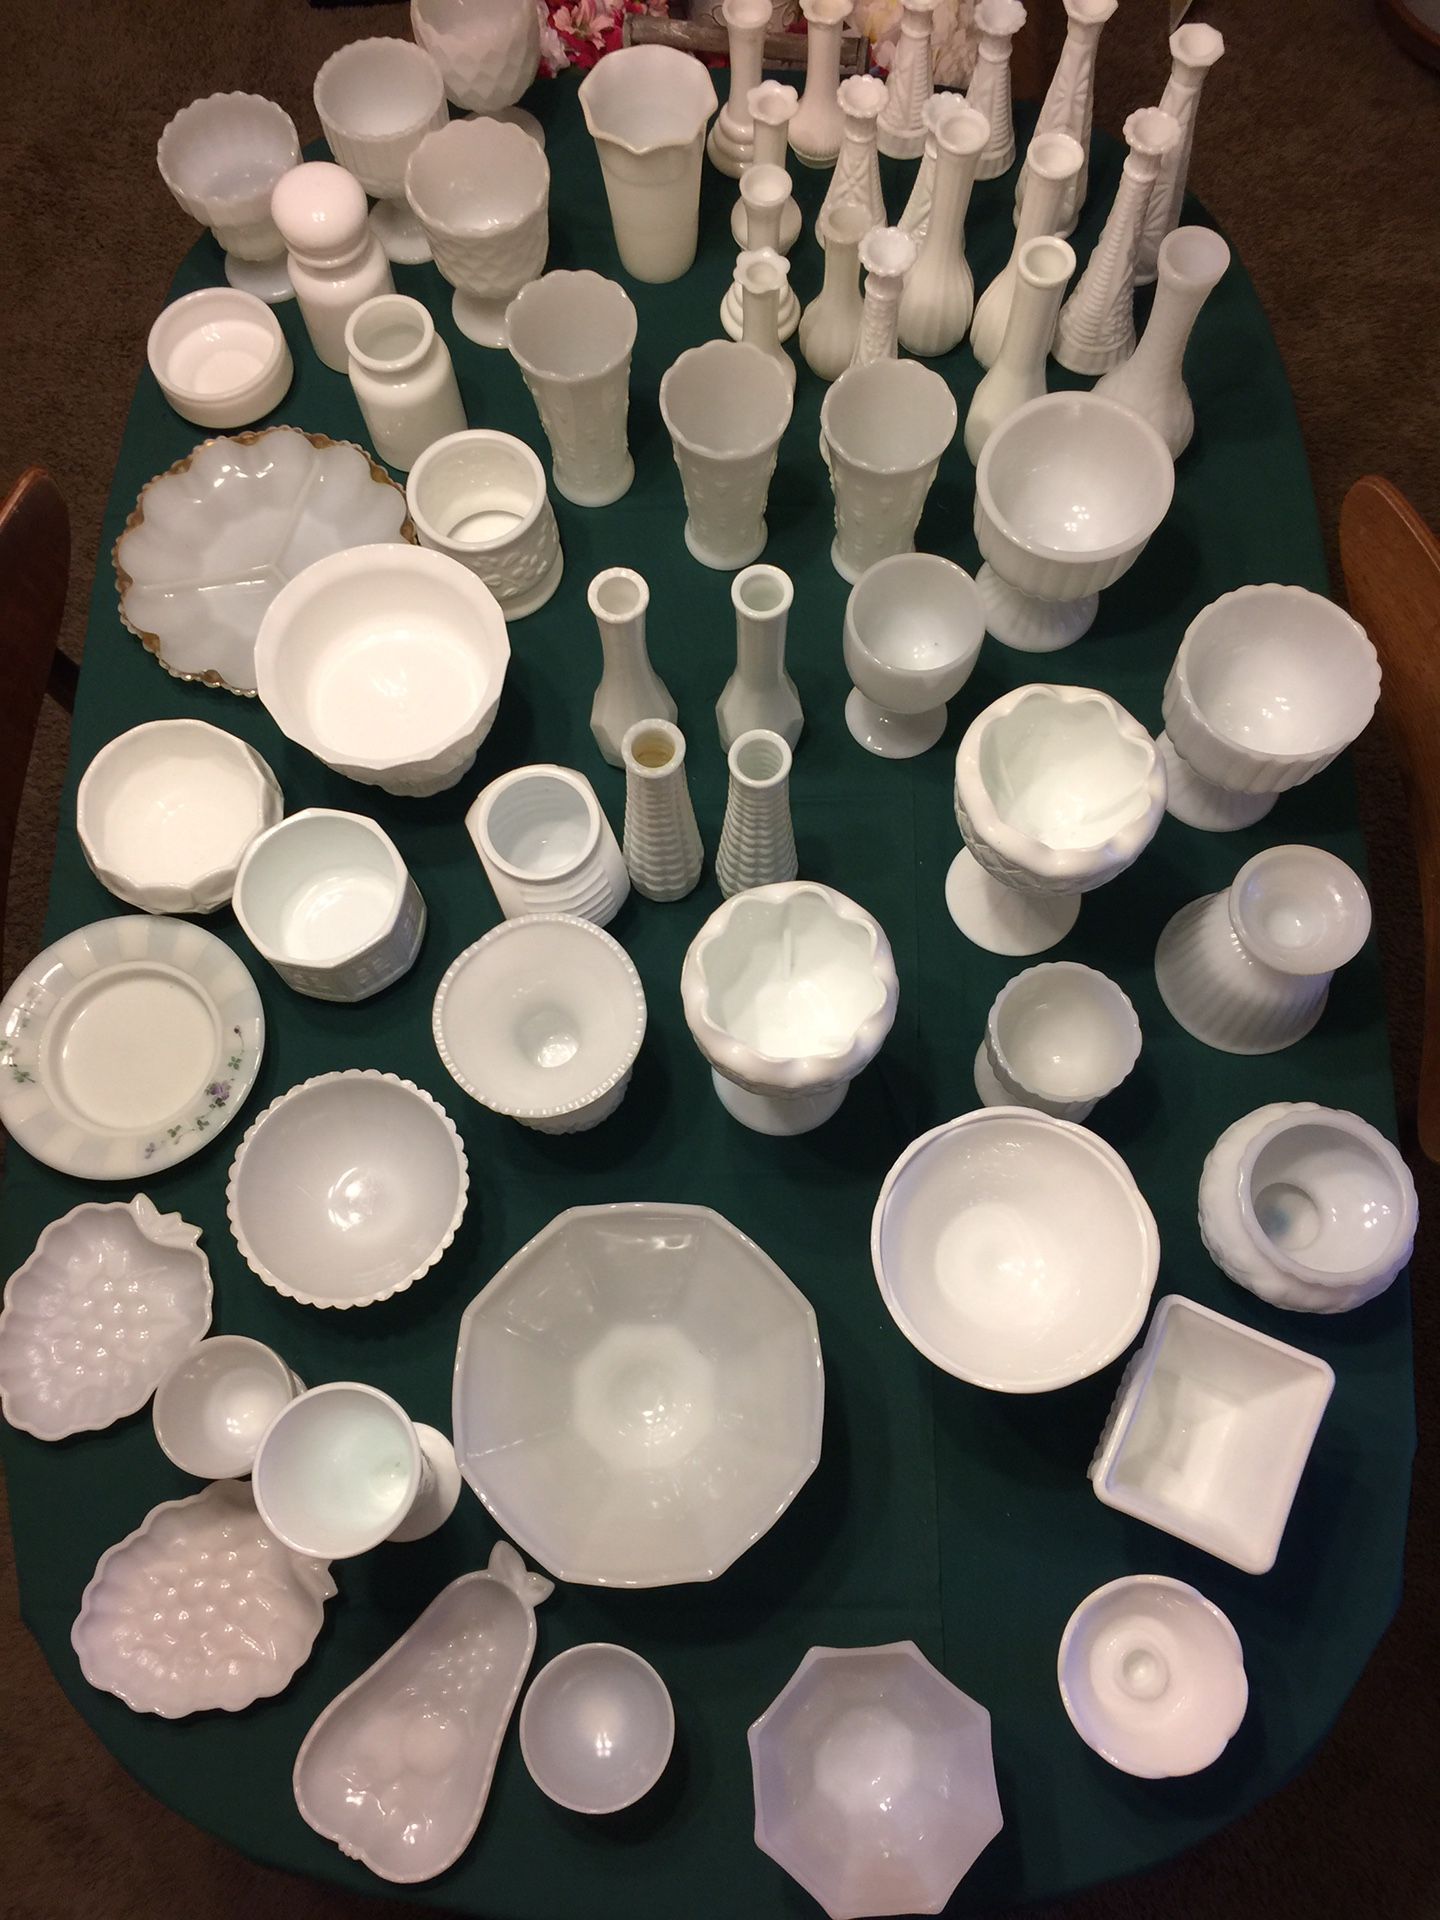 Huge milk glass collection